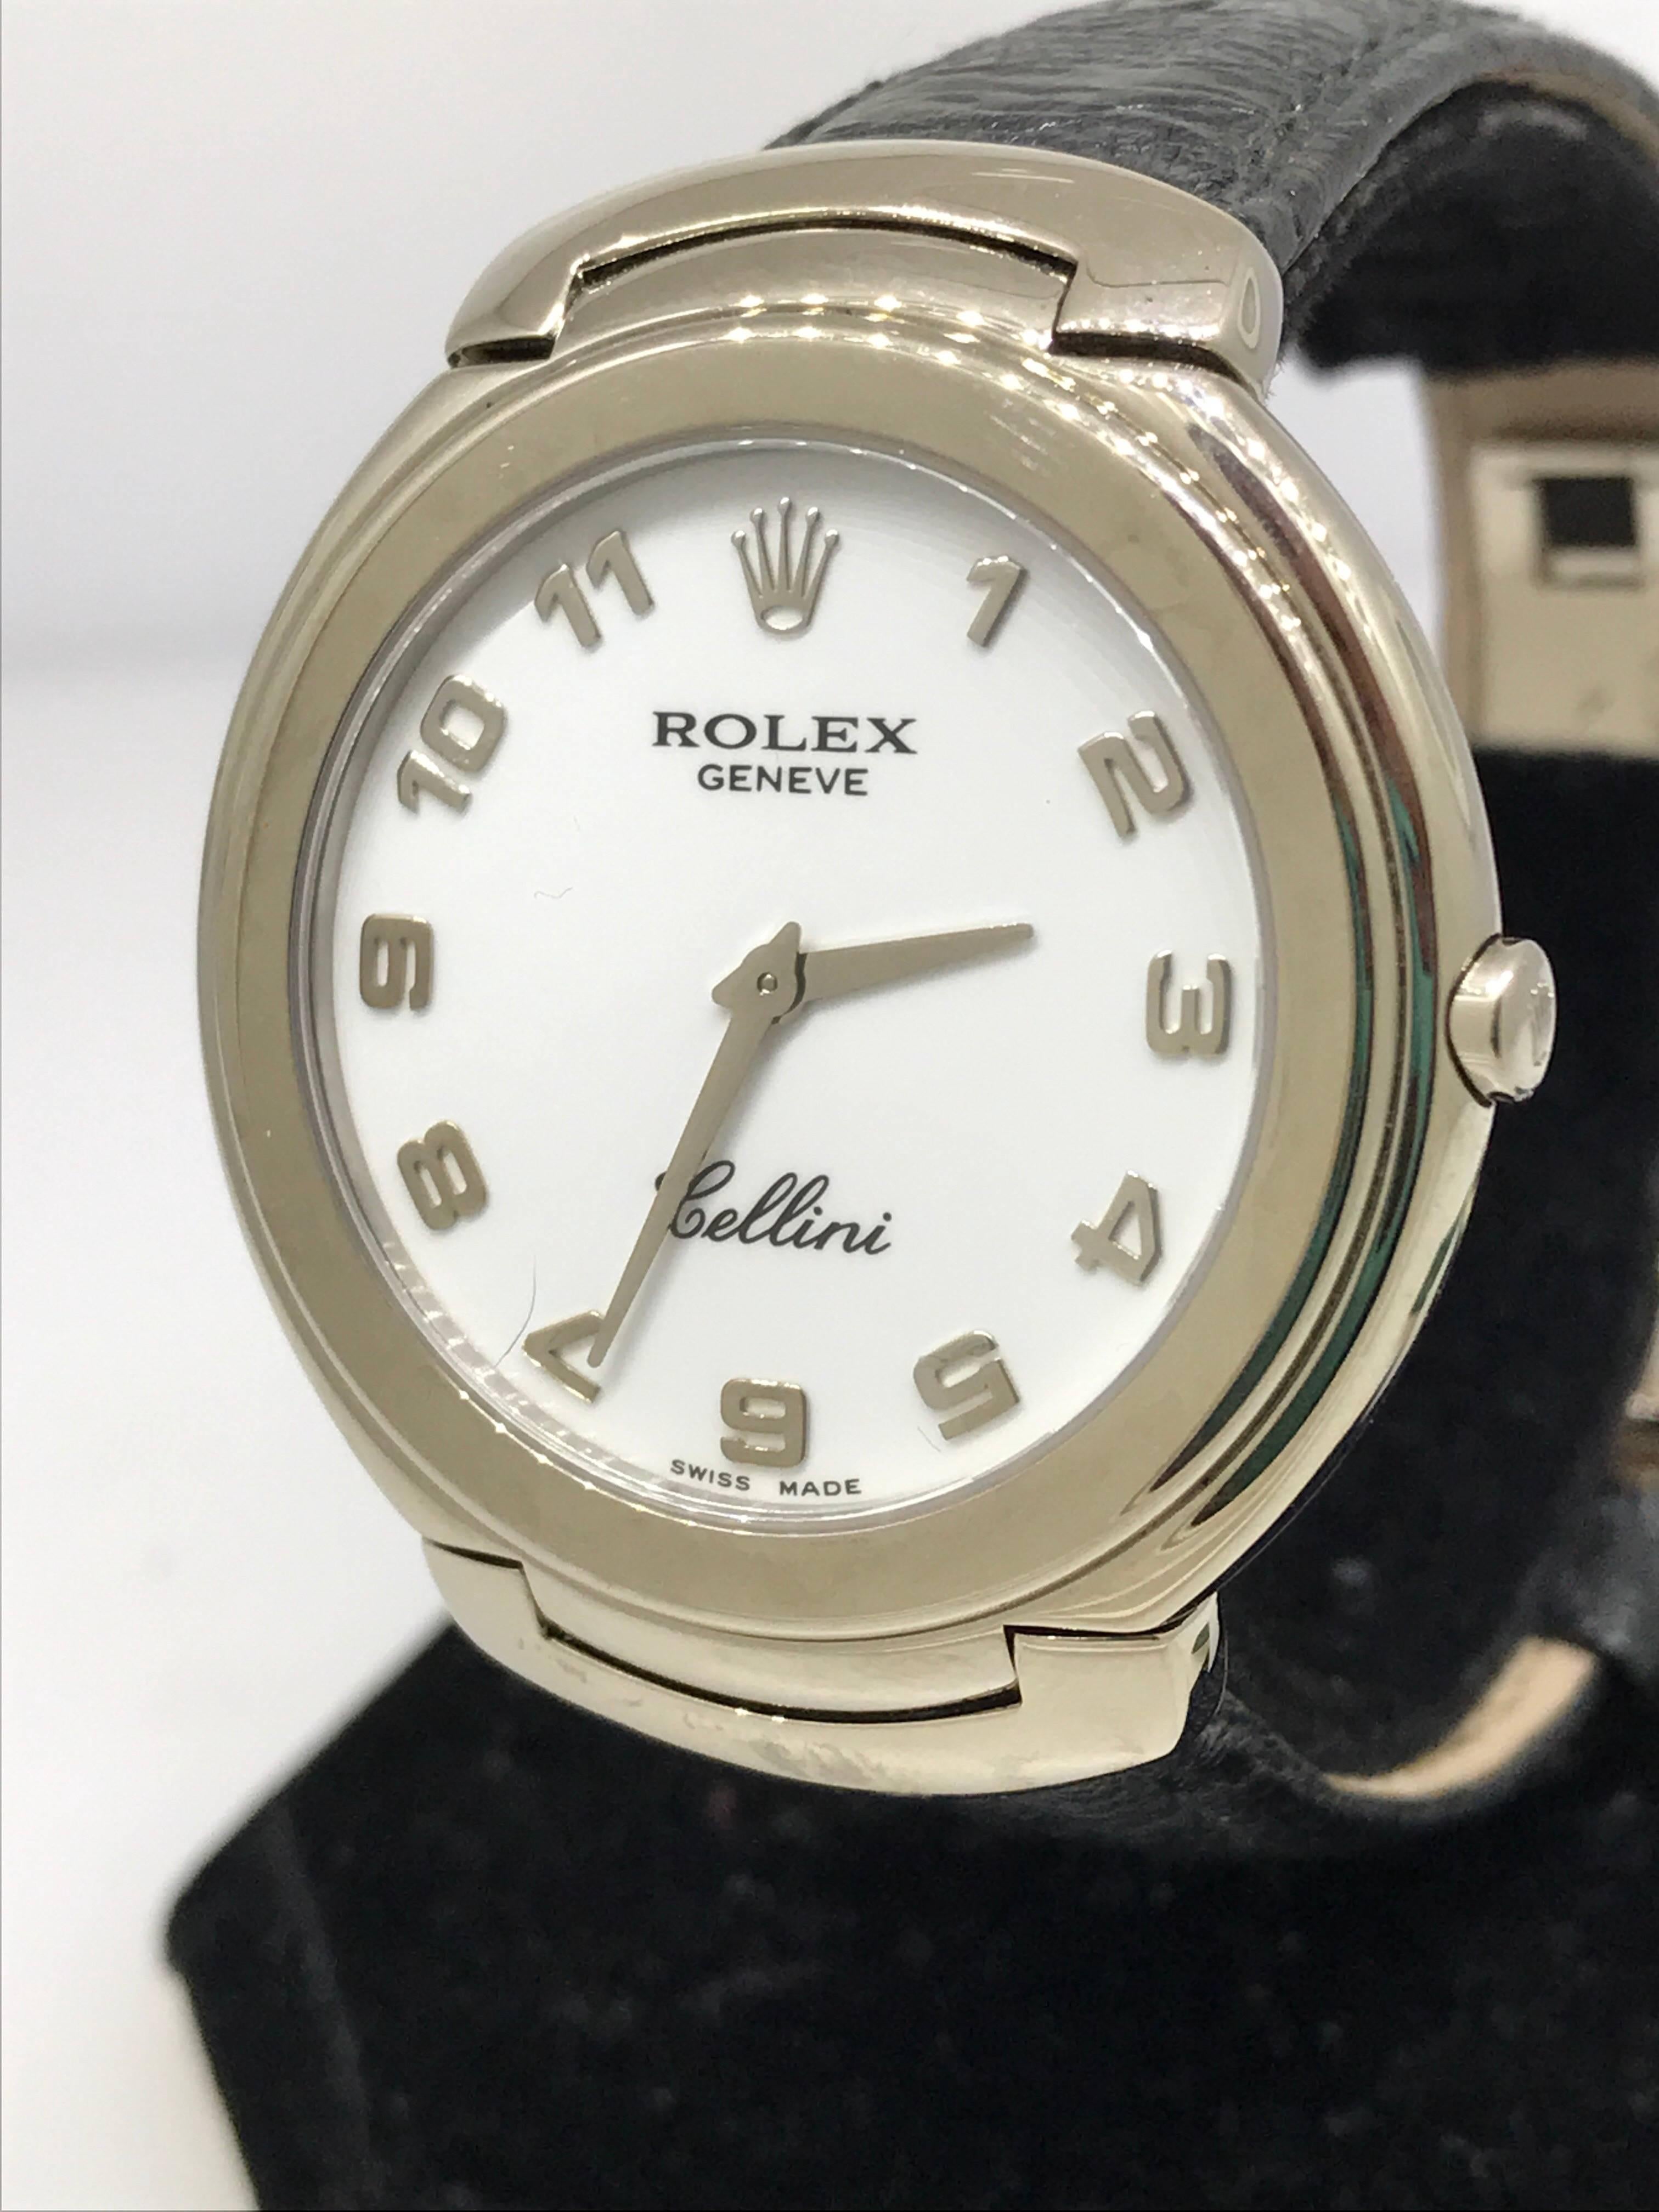 Rolex Cellini Men's watch

Model Number: 6623/9

100% Authentic

Brand New

Comes with original Rolex box, warranty card and instruction manual

18 Karat White Gold

White dial

Arabic Numeral Hour Markers

Case Size: 36mm

Quartz Movement

Black